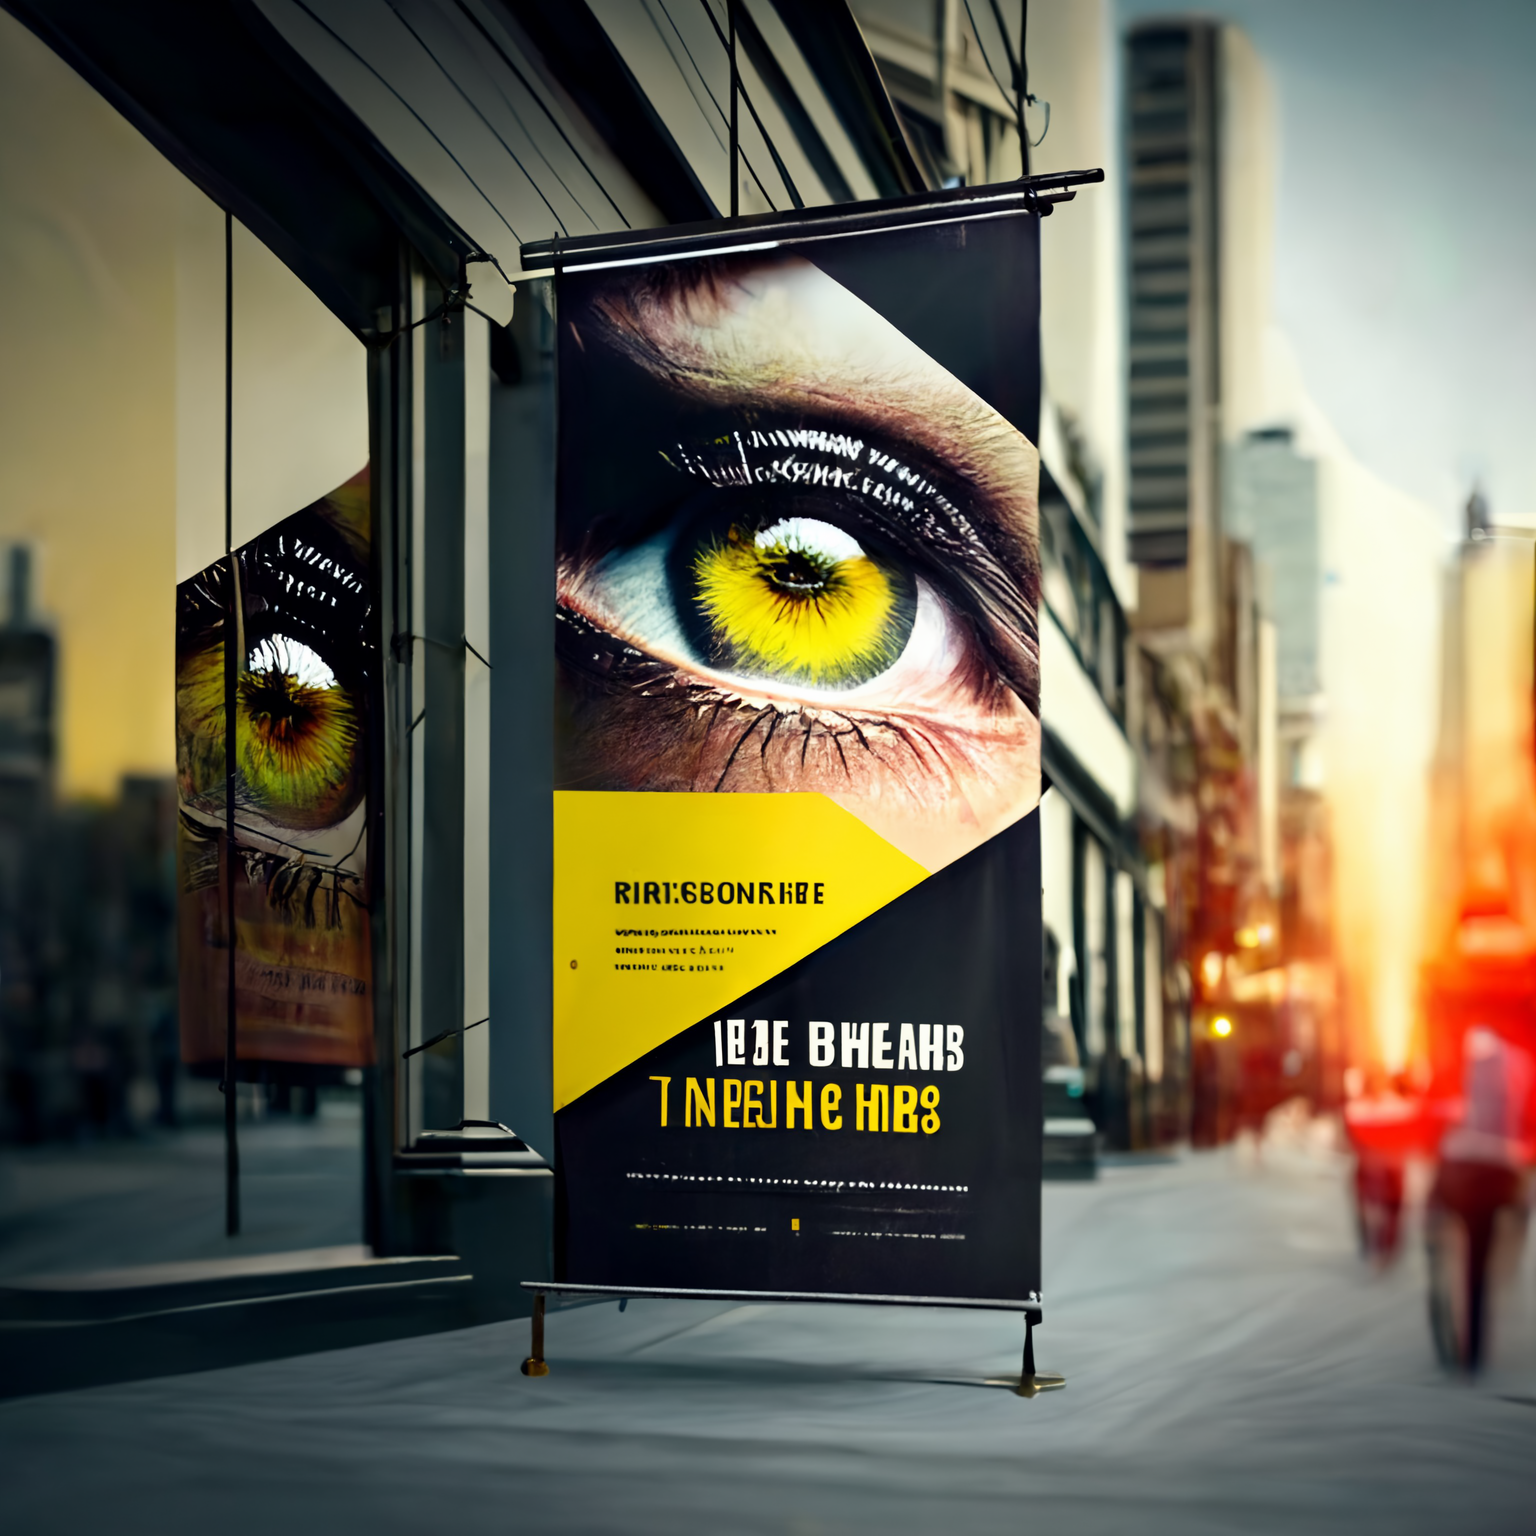 eye-catching banners for promoting your business